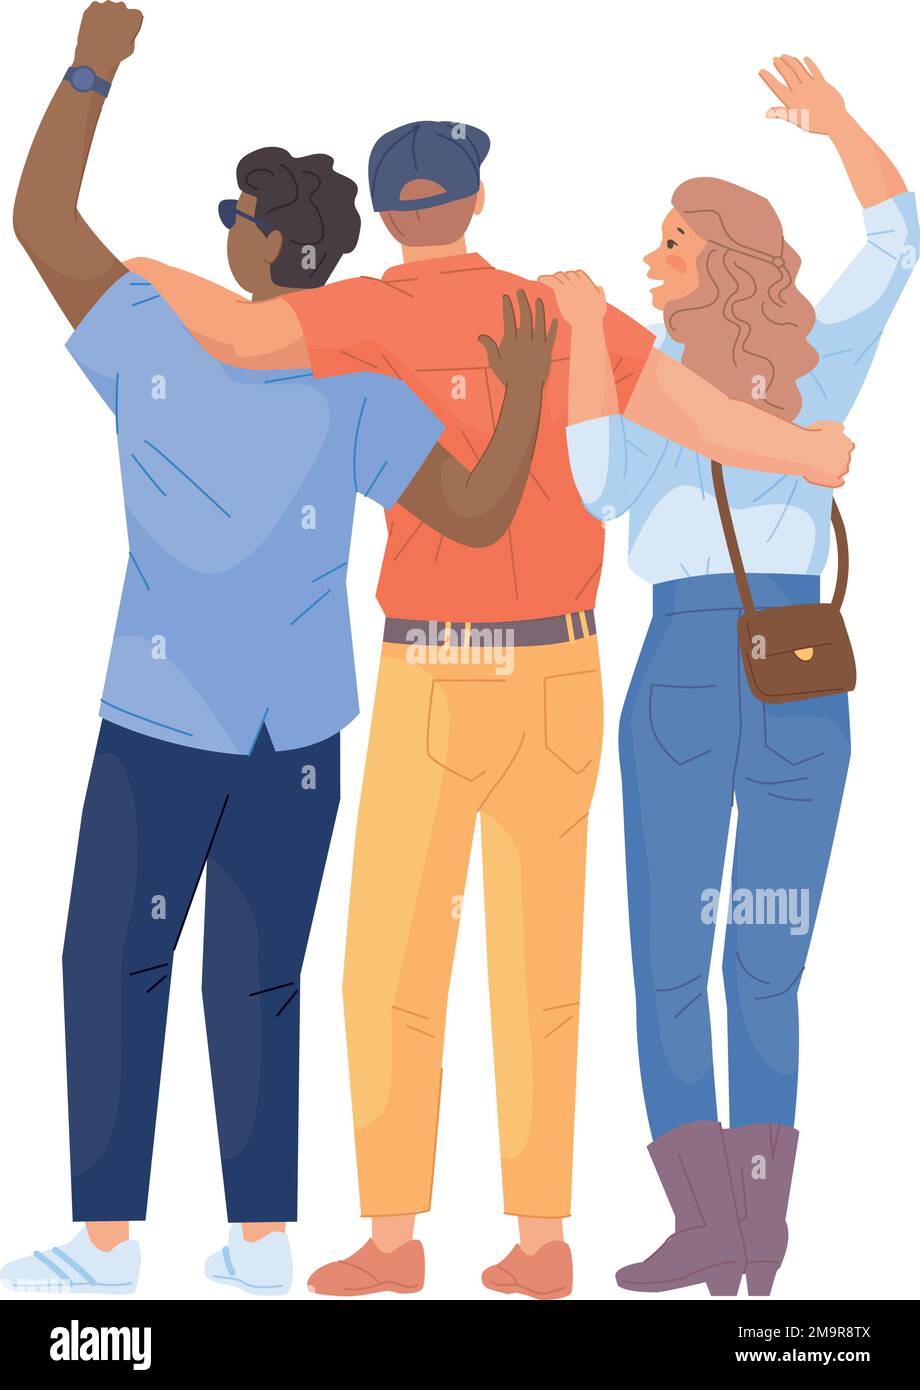 Friend hug rear view. People together. Teamwork concept isolated on white background Stock Vector